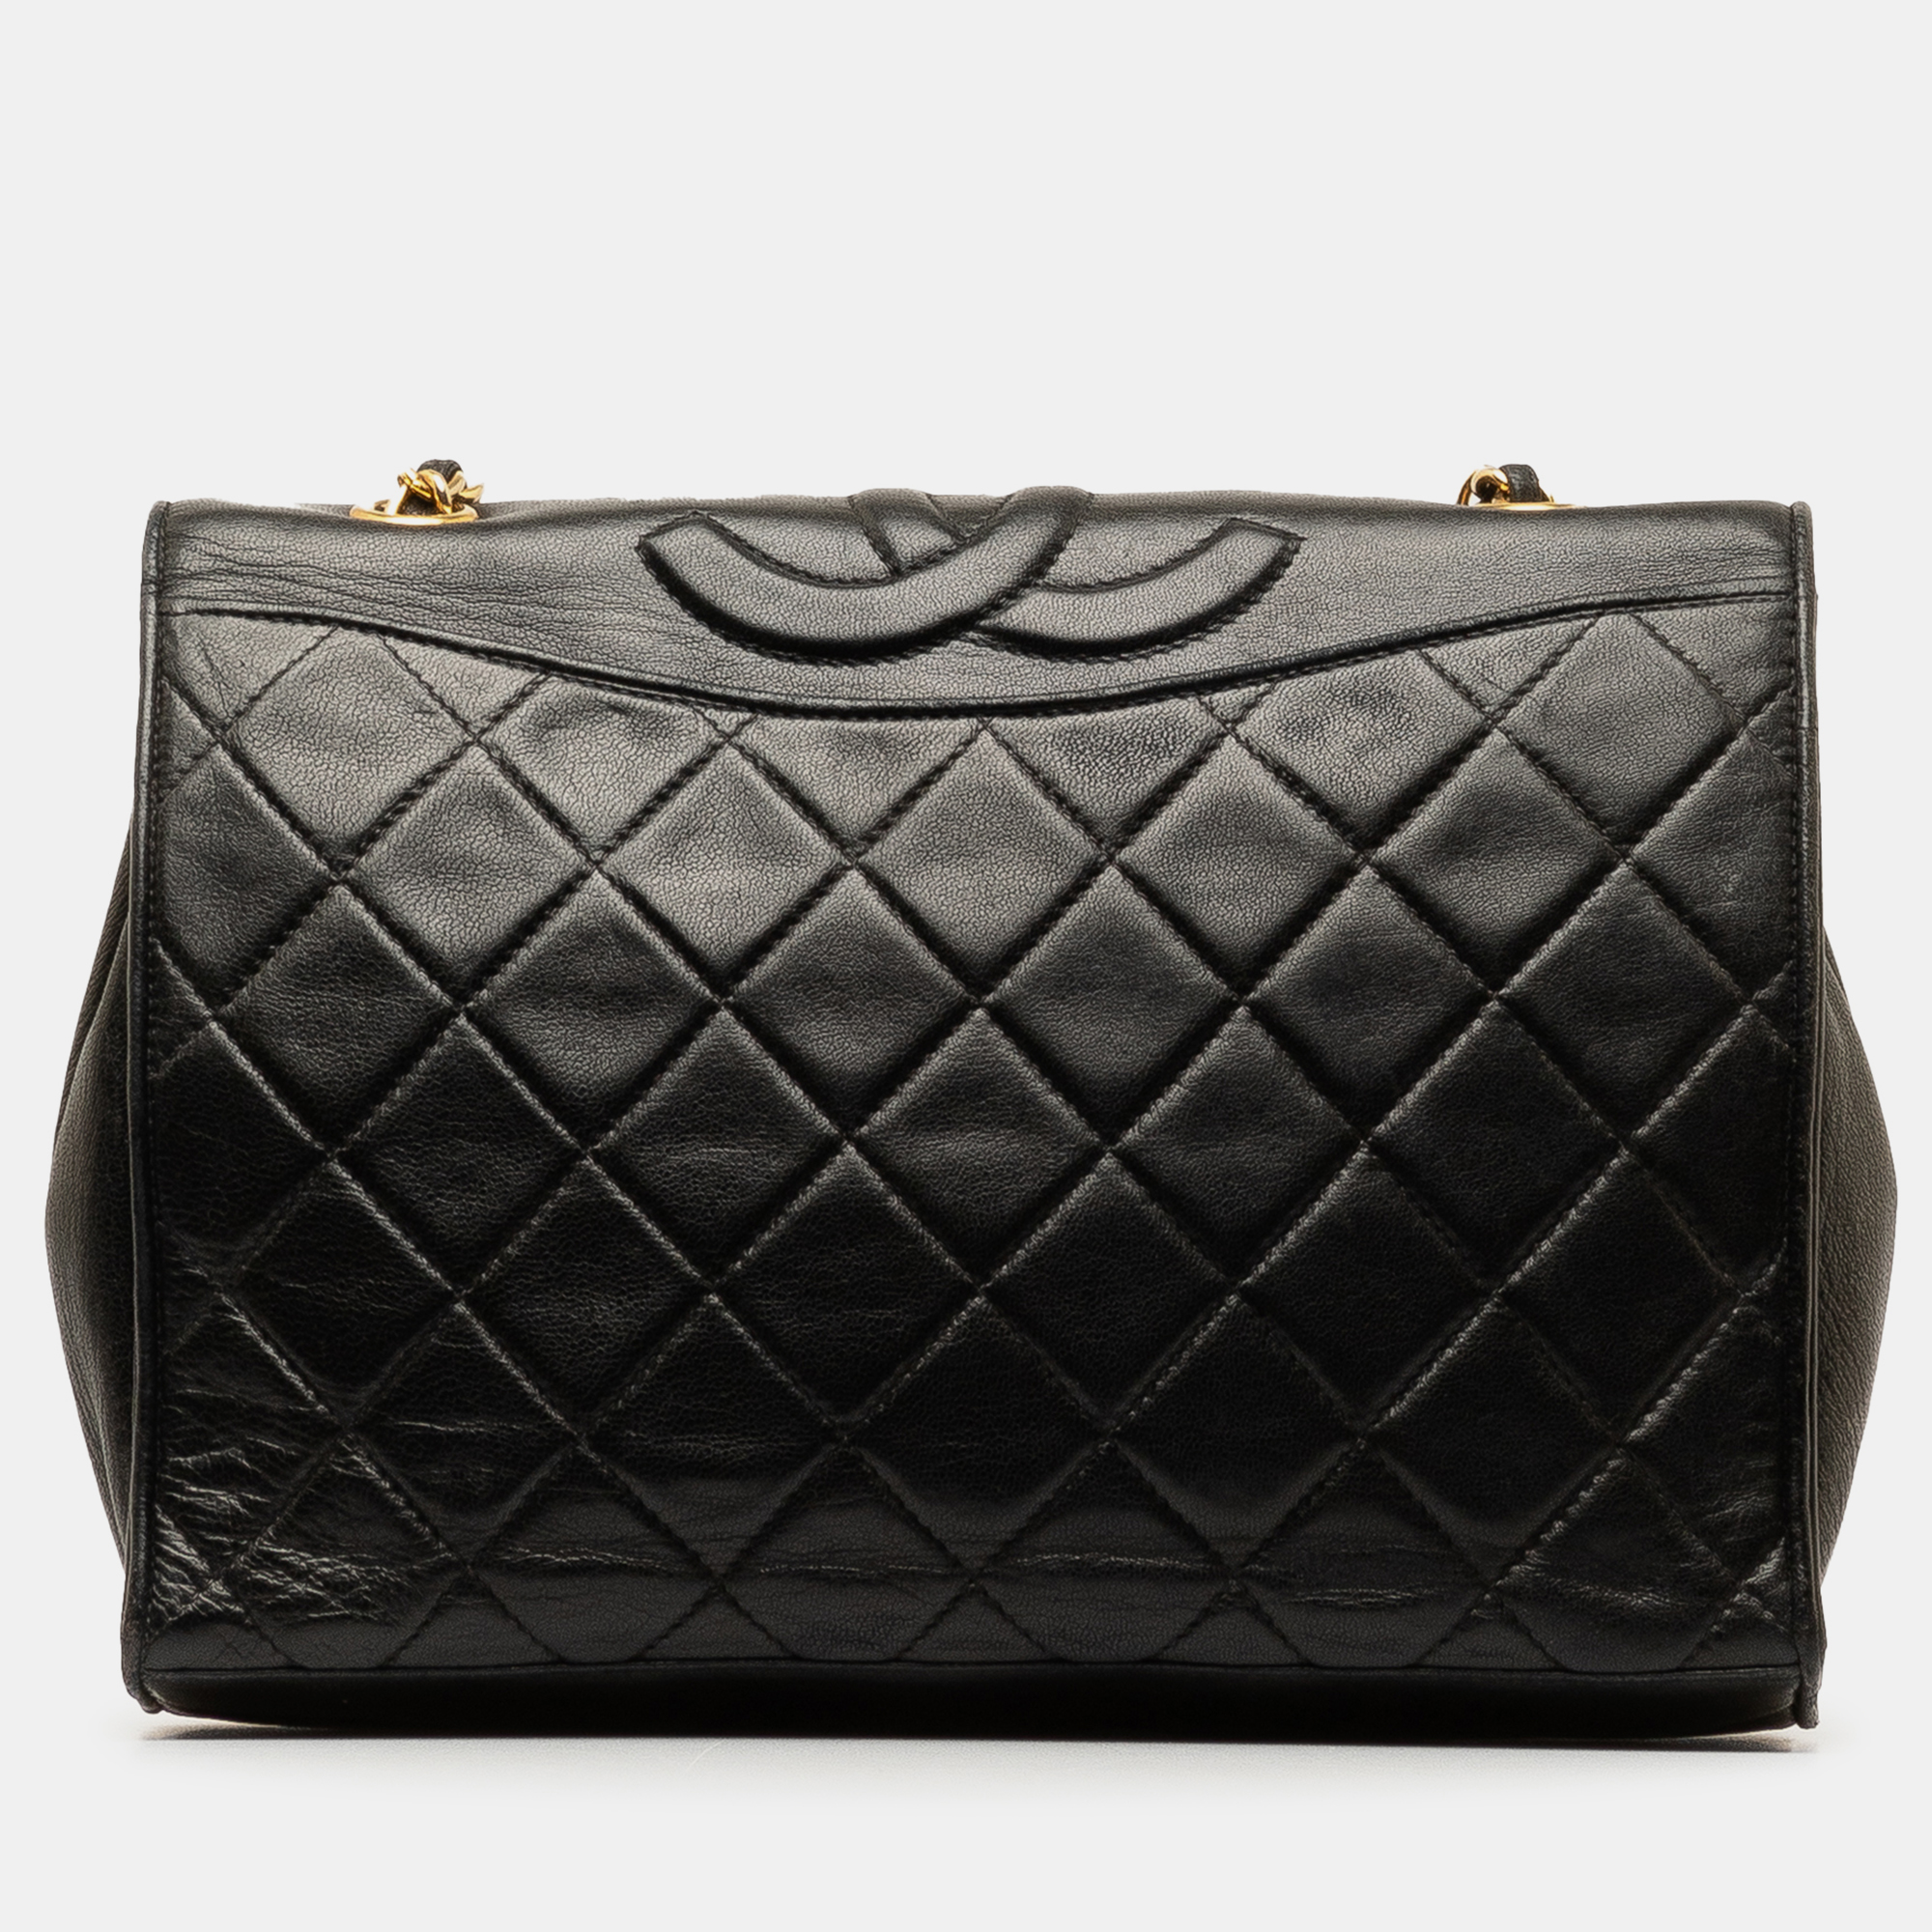 Chanel cc quilted lambskin full flap